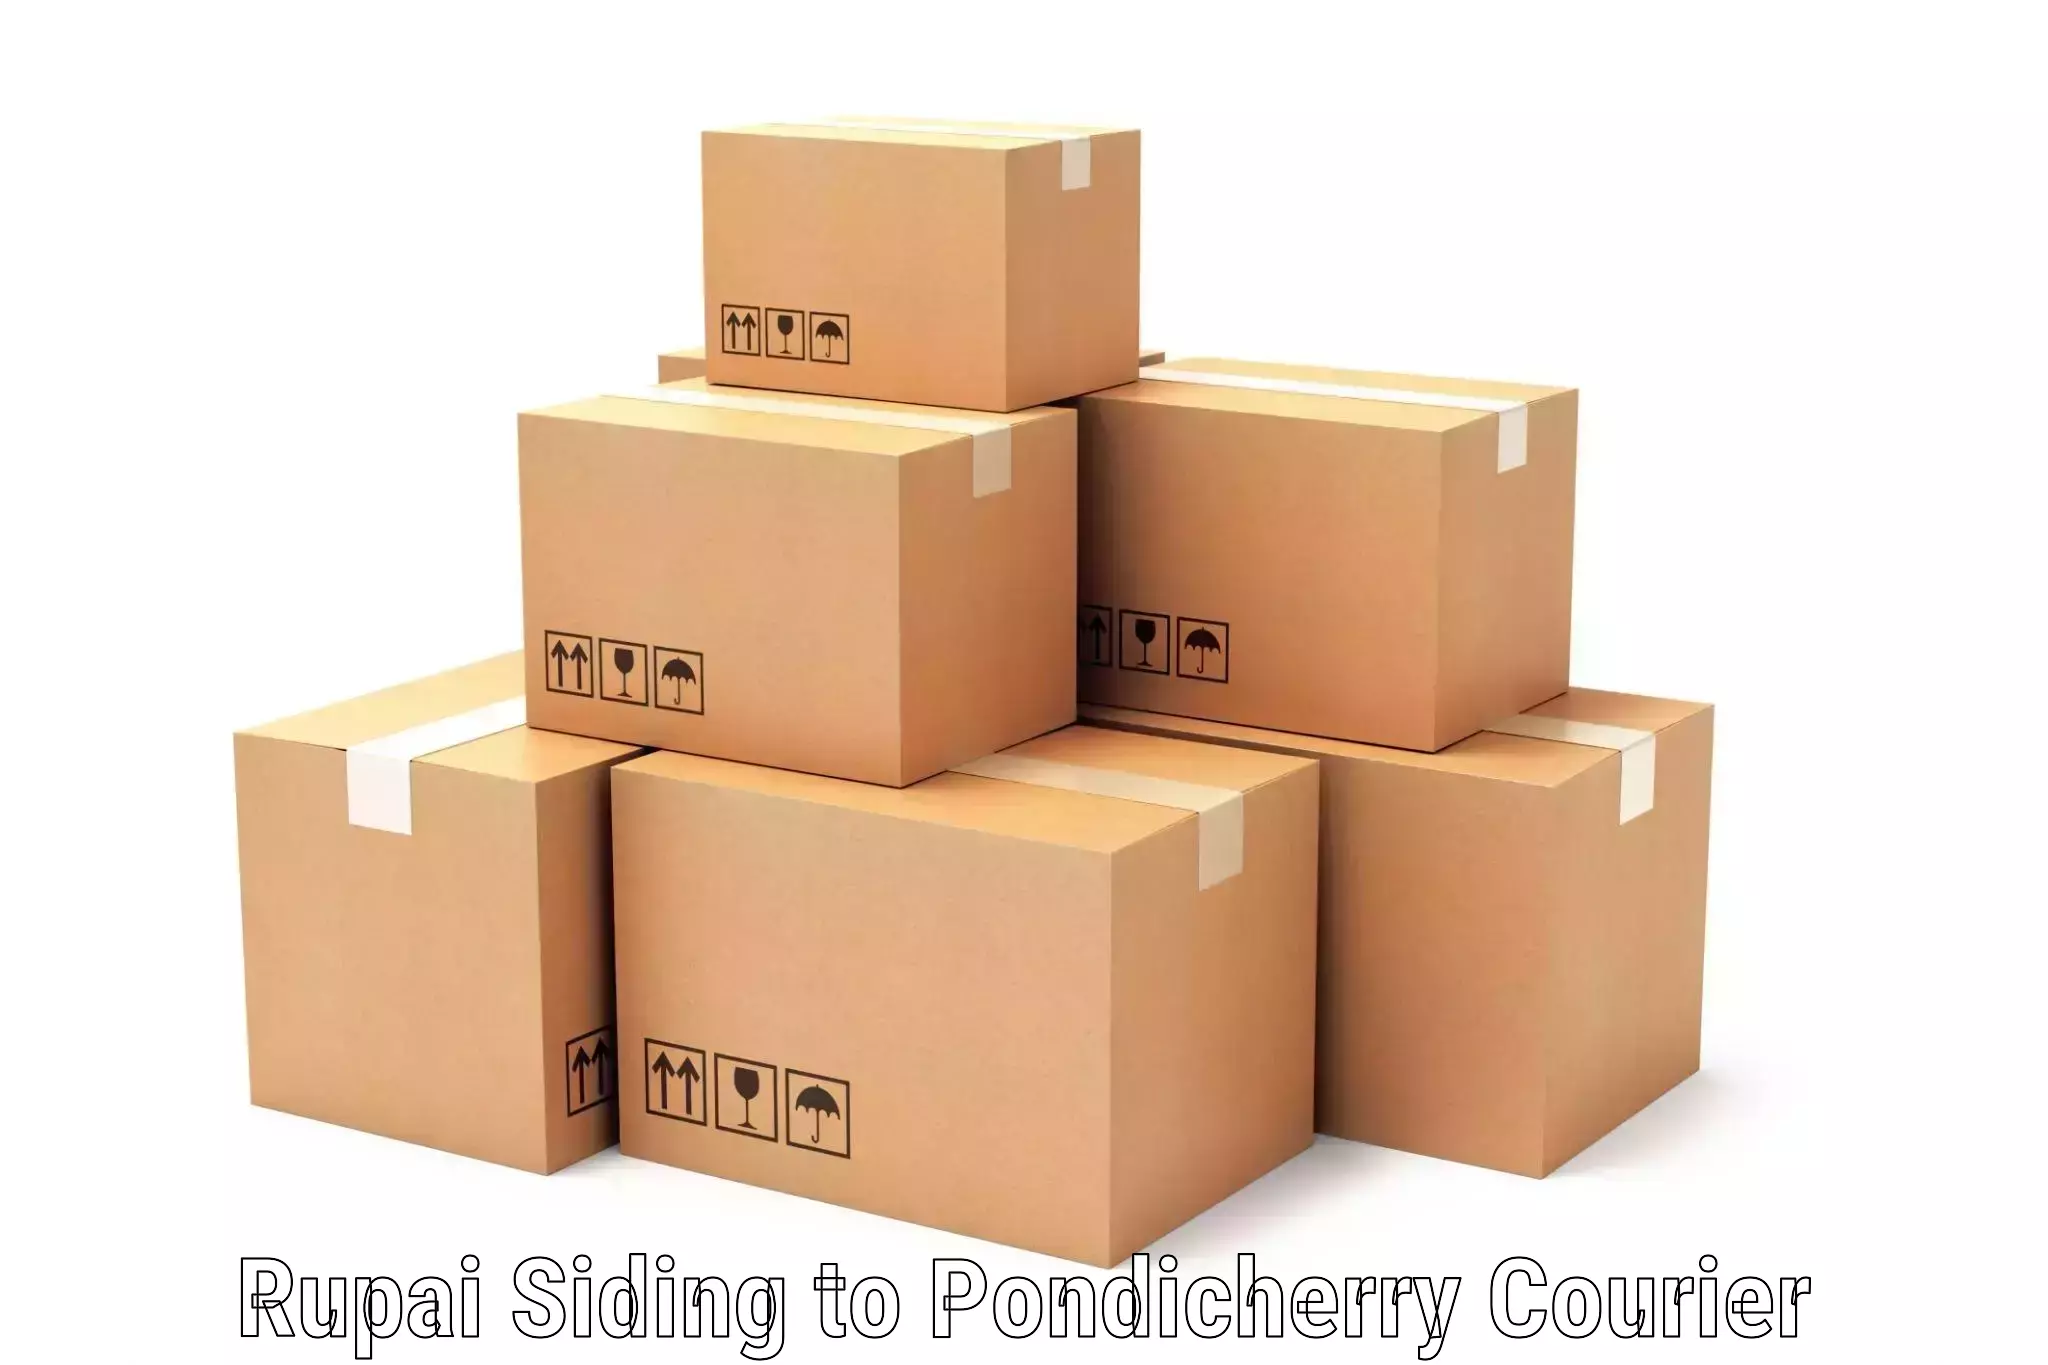 Reliable courier service Rupai Siding to Pondicherry